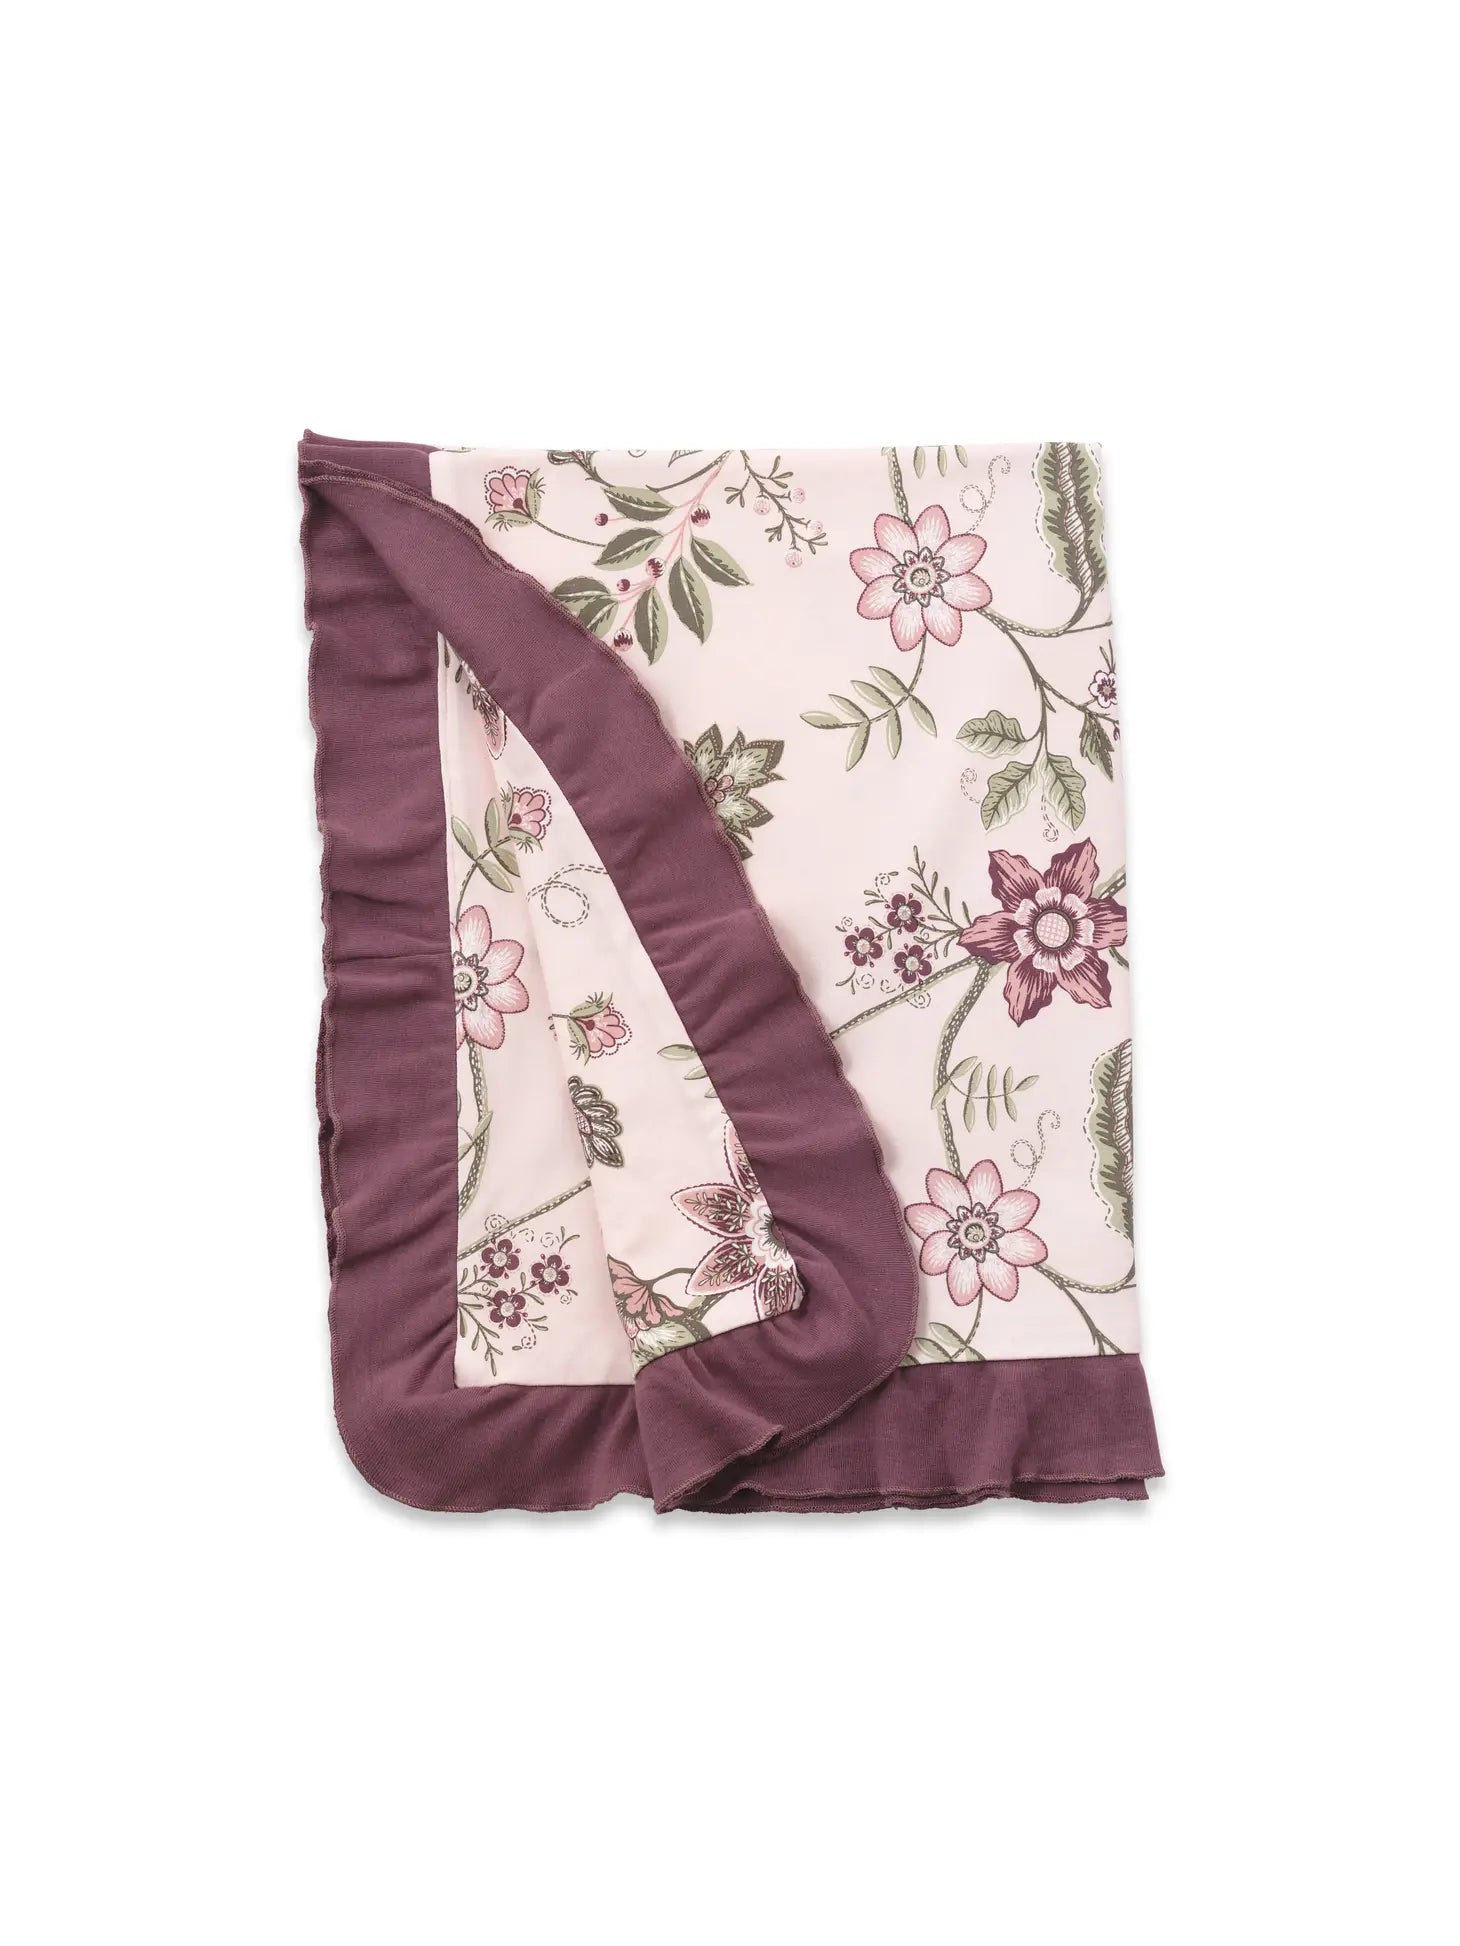 floar stichery bamboo cotton blanket with ruffle detail plum and pink floral 